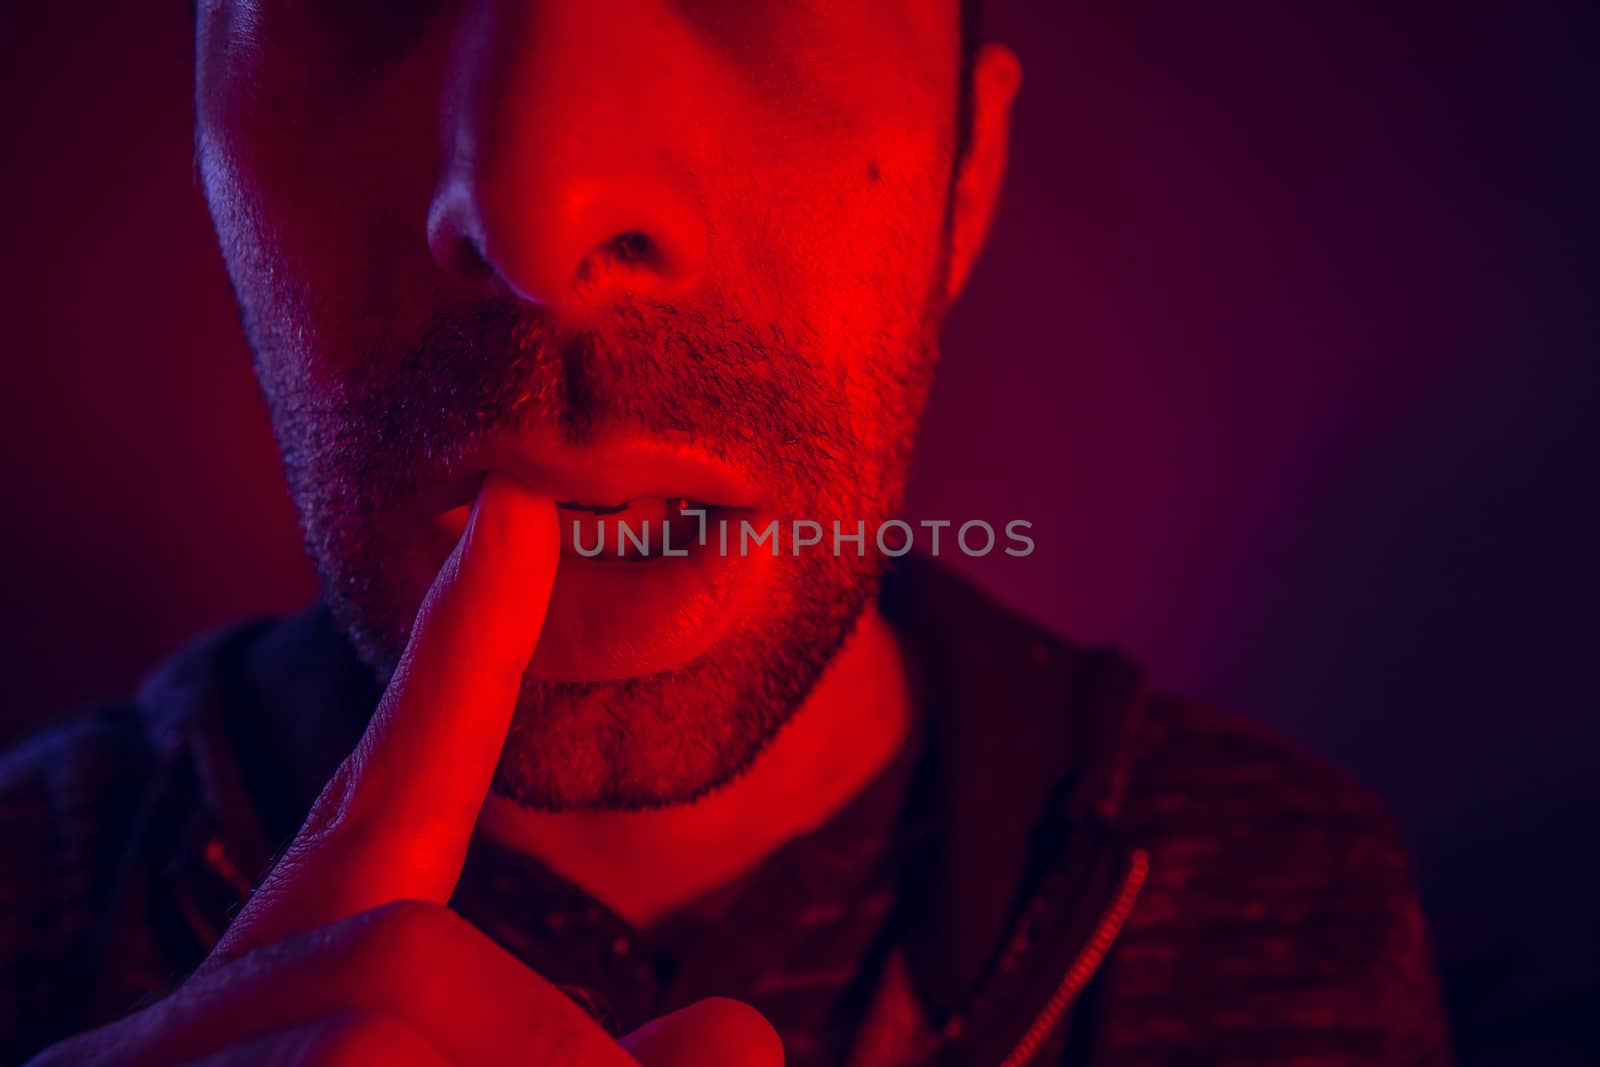 Man with seductive facial expression holding finger on mouth. Close up portrait of flirty young man with shushing gesture with his finger to his lips looking at camera.